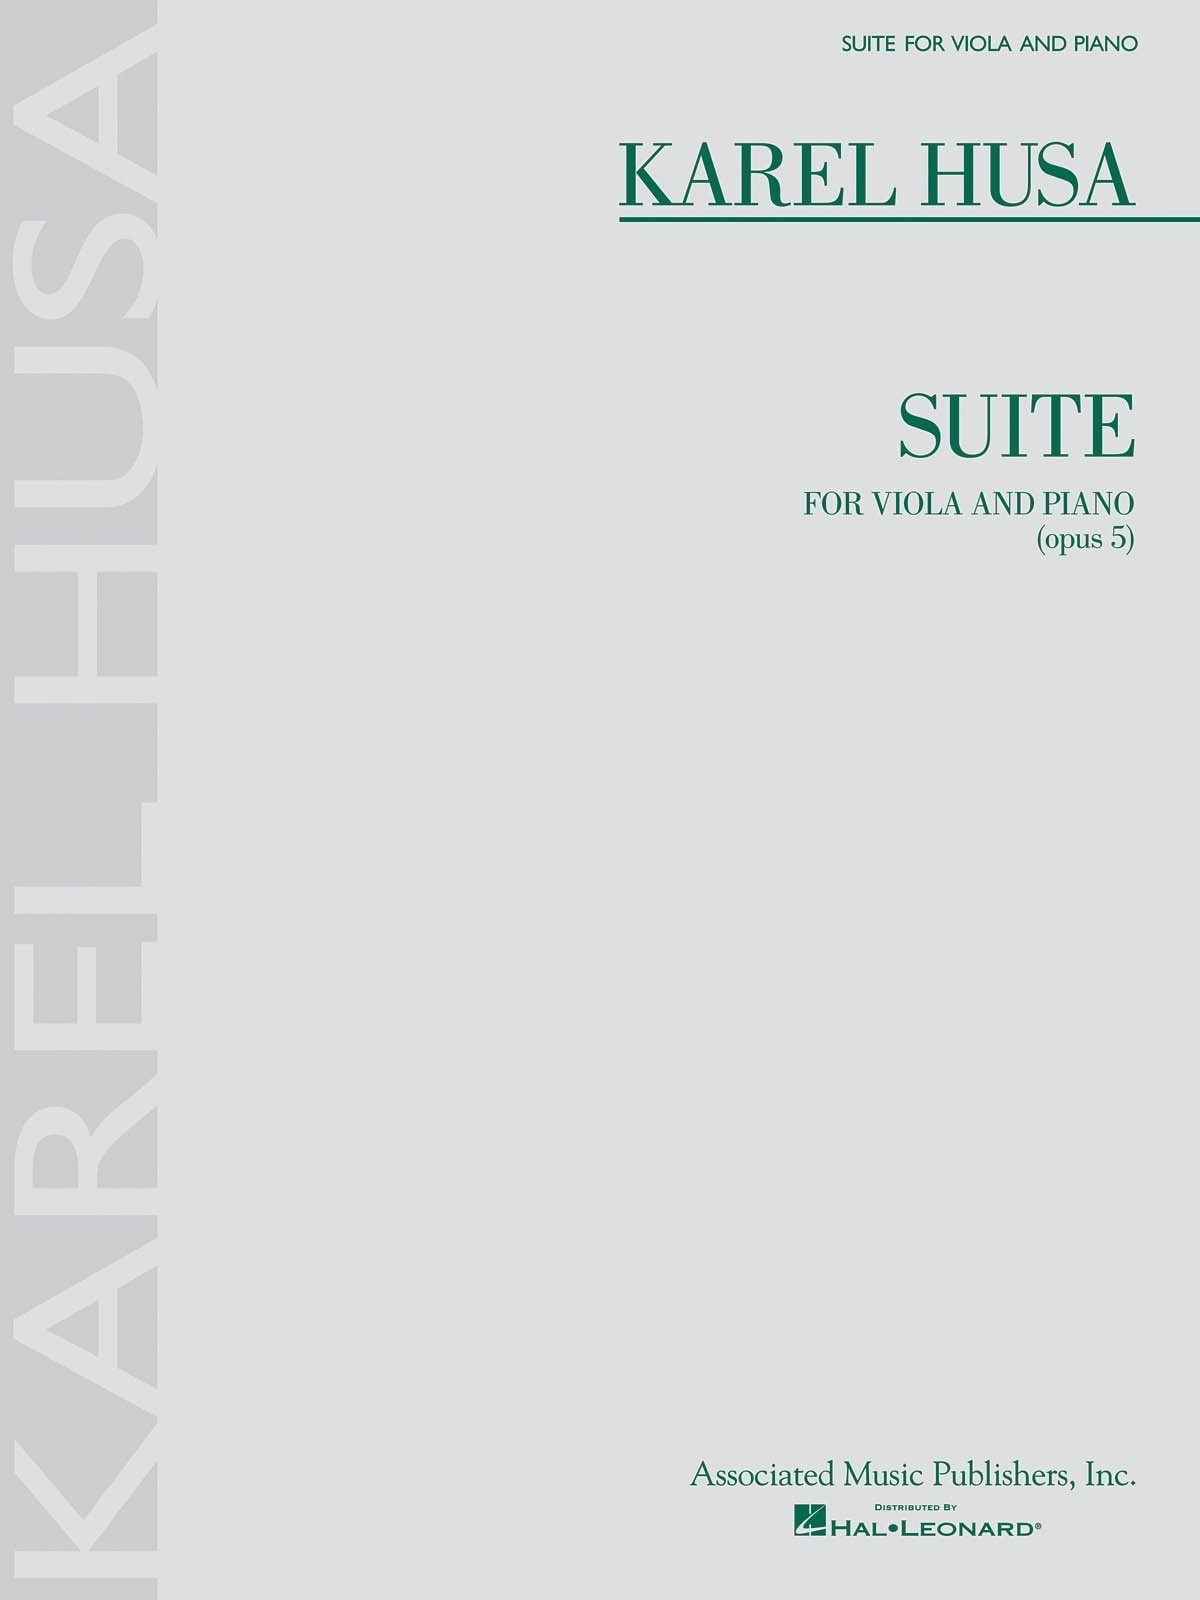 Husa: Suite for Viola Opus 5 published by AMP